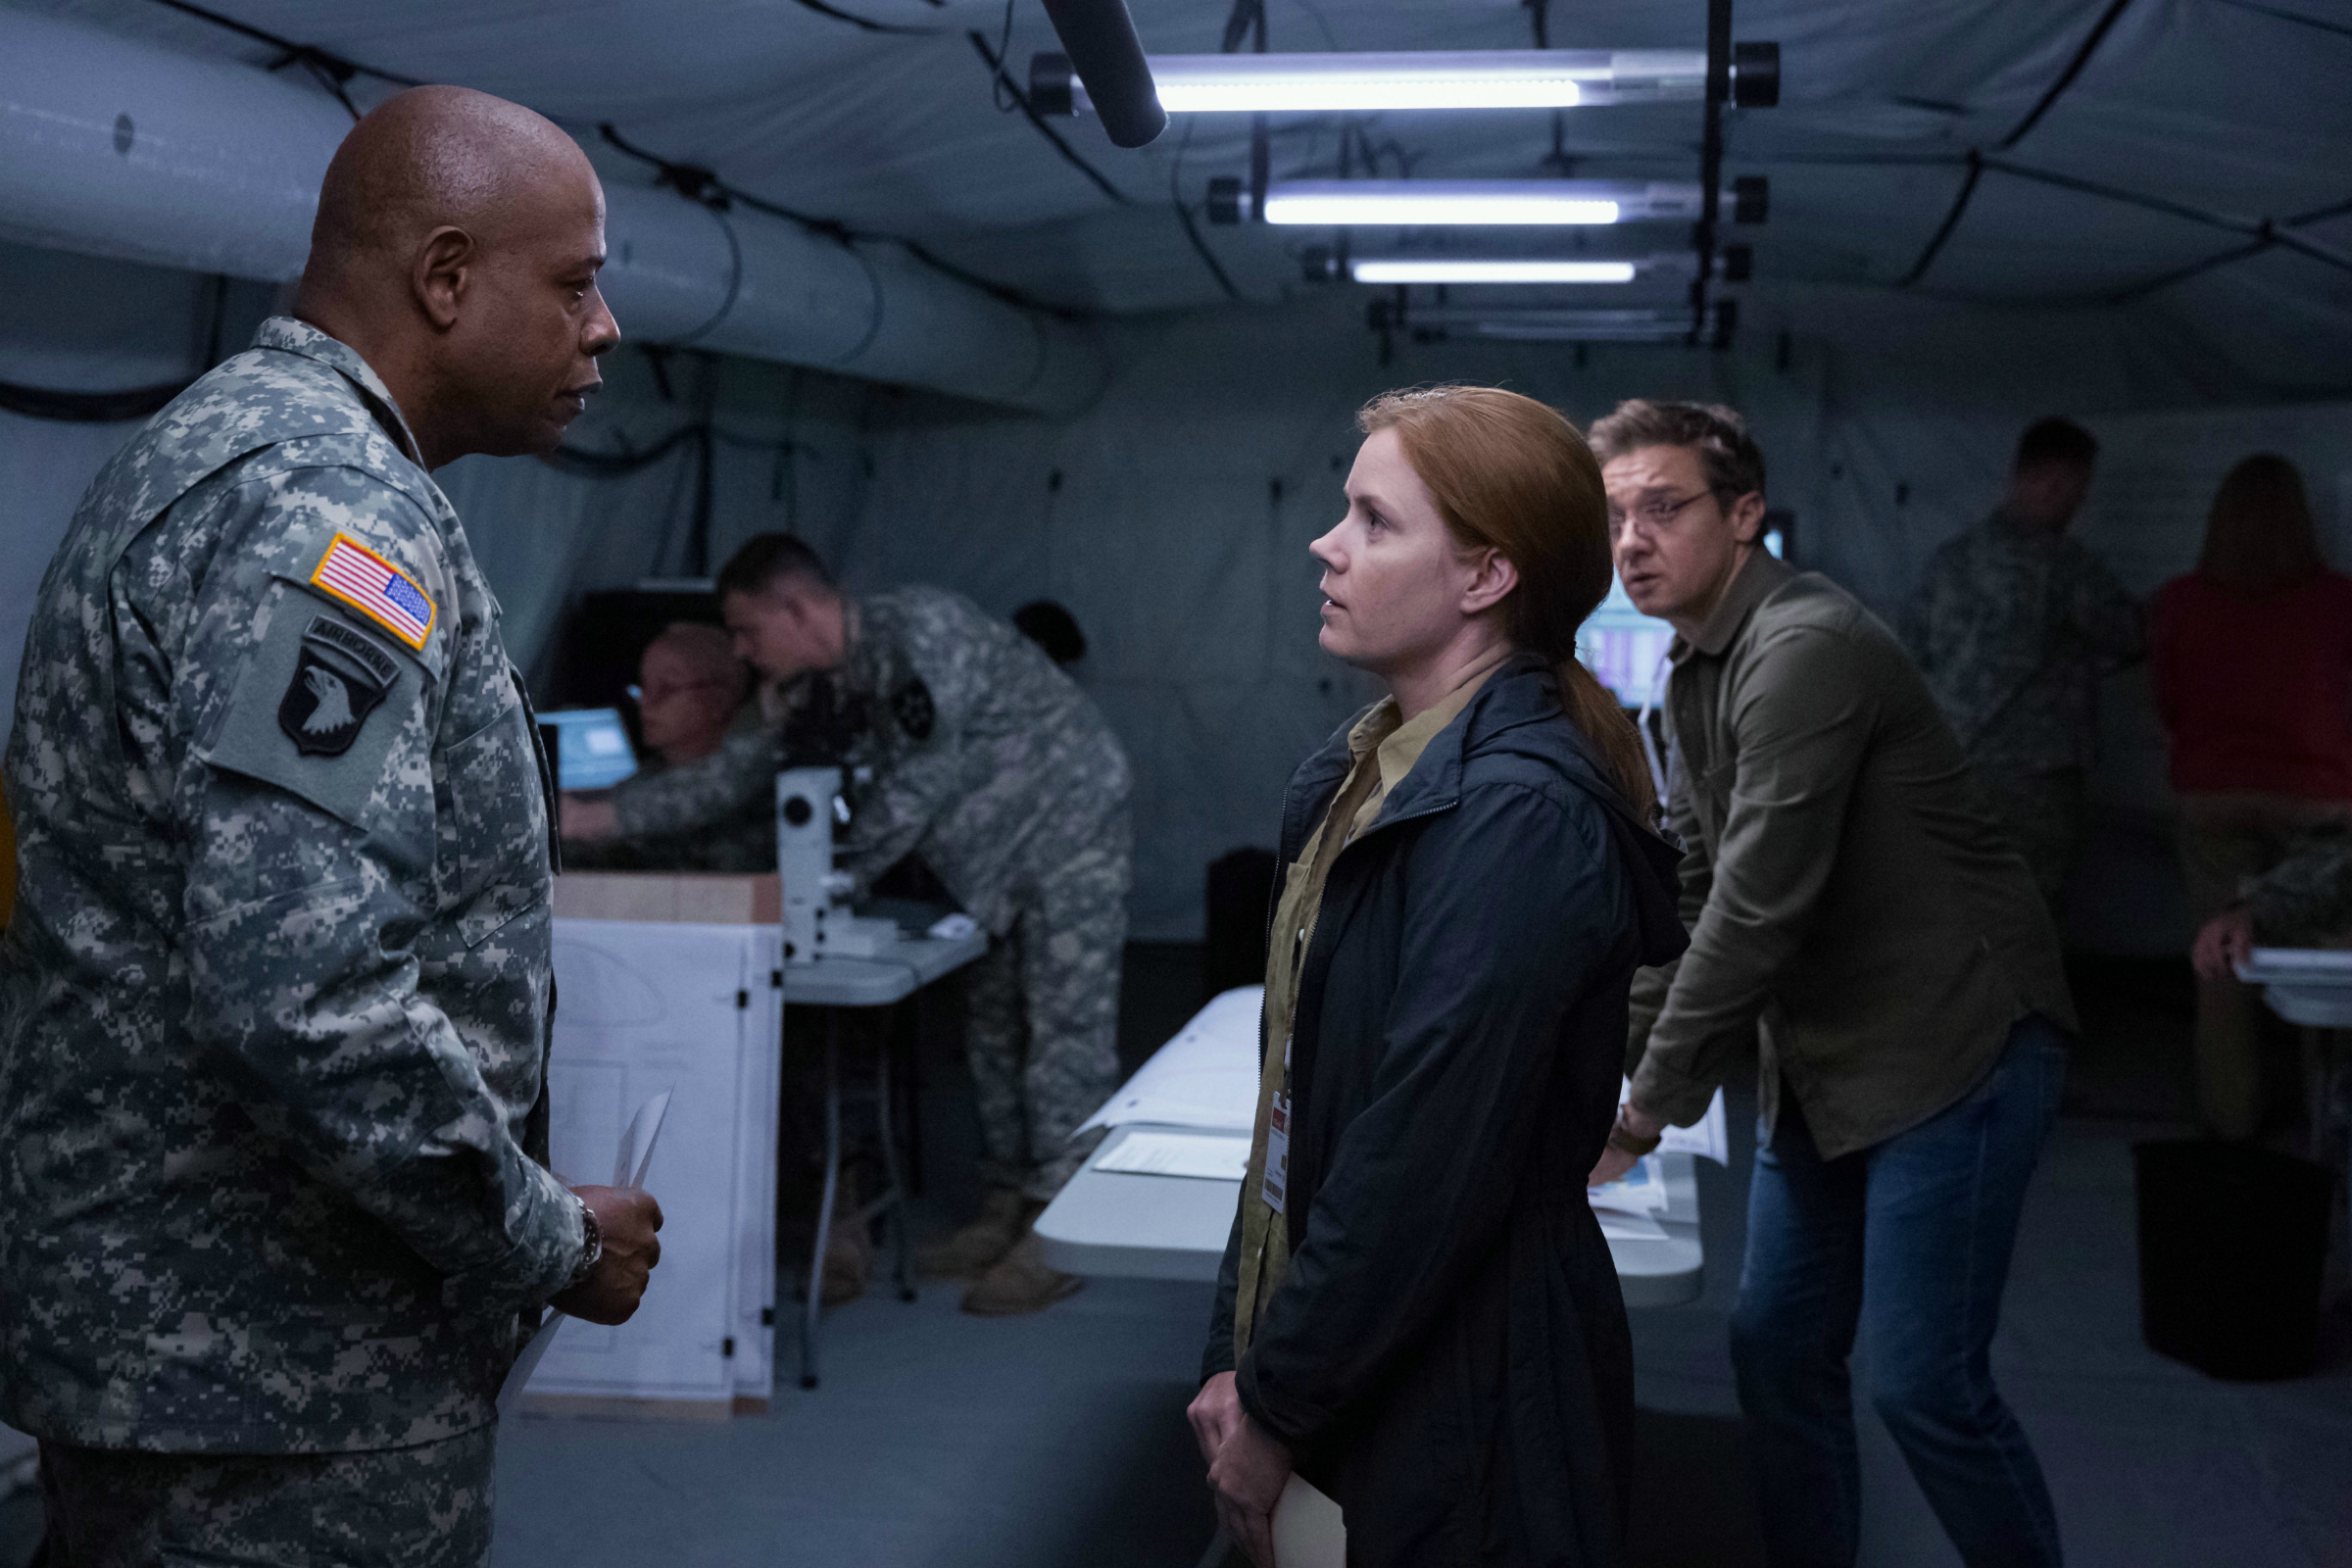 movie, arrival, amy adams, arrival (movie), forest whitaker, jeremy renner